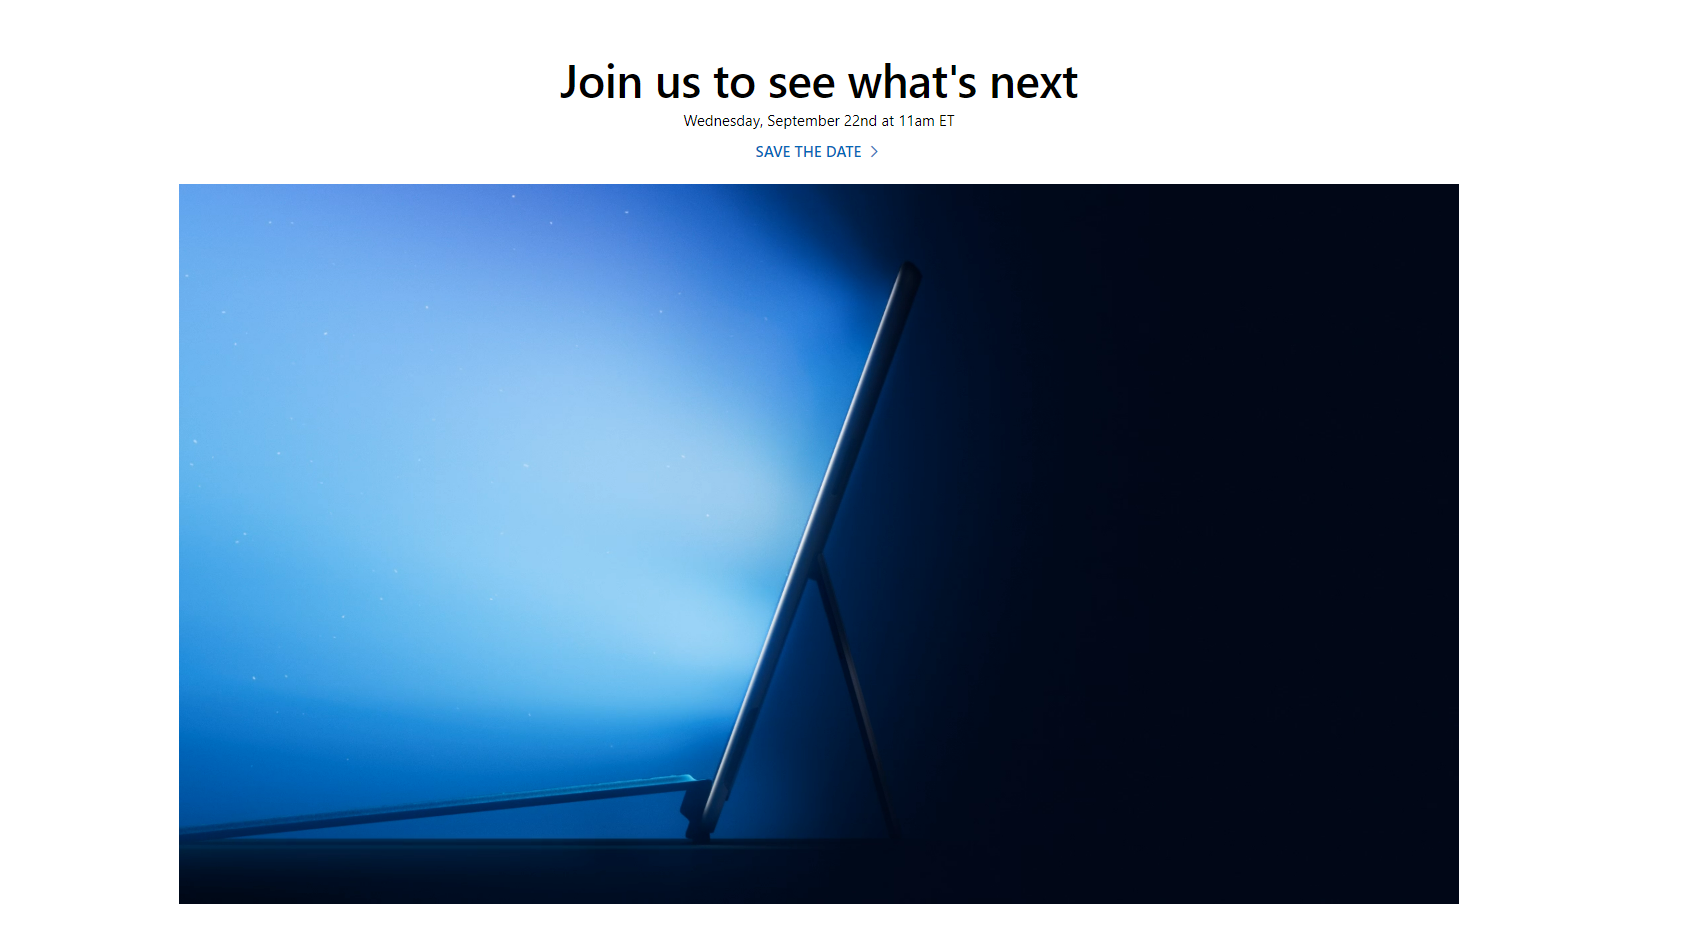 Microsoft Surface Event Planned for September 23